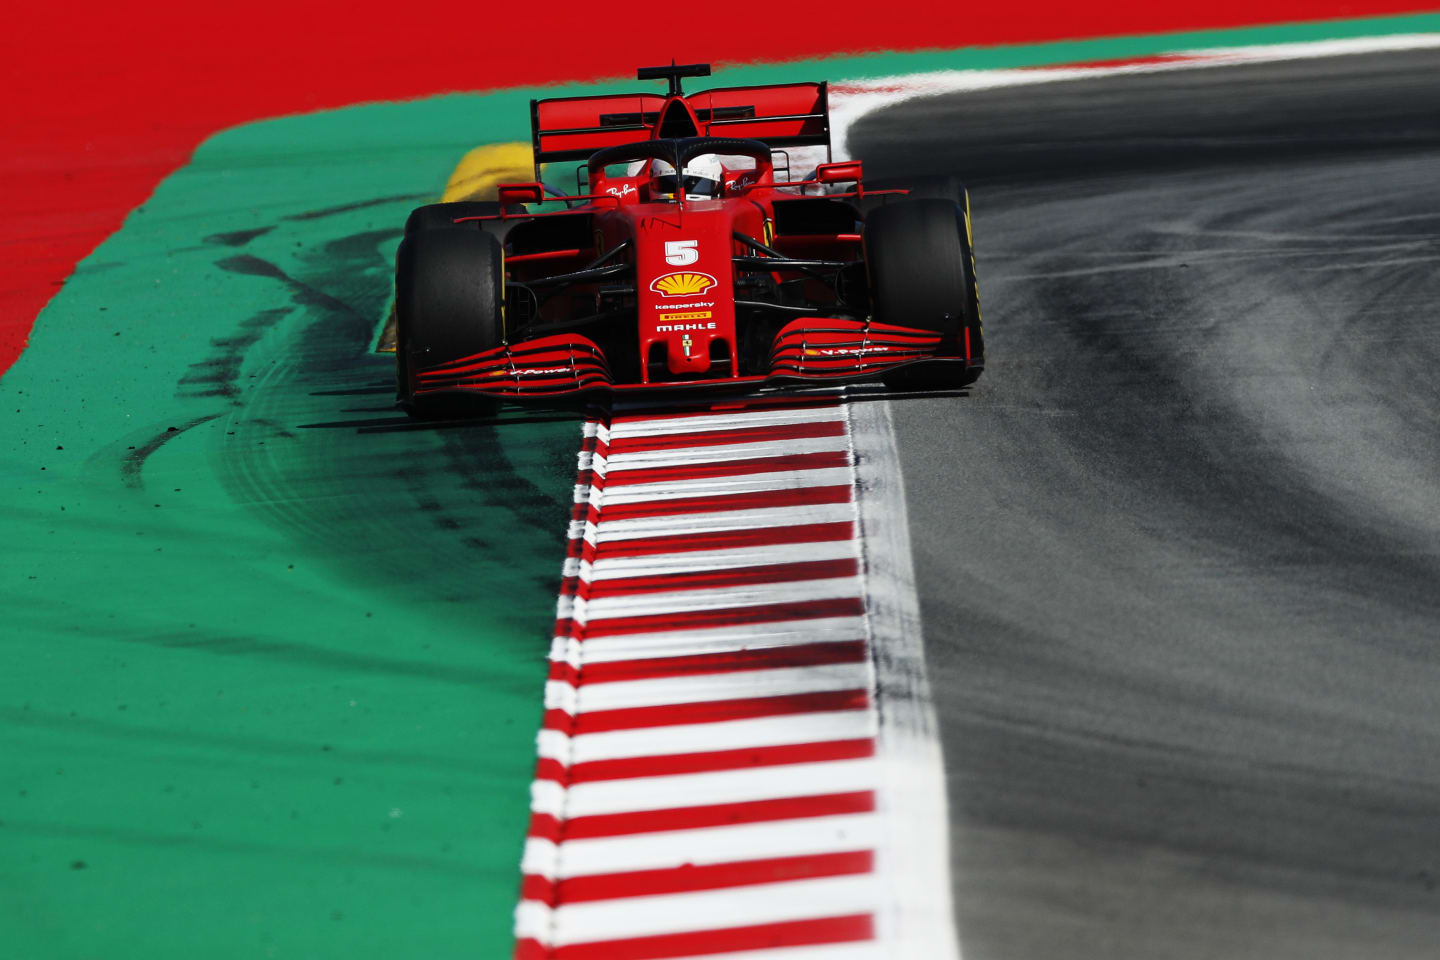 BARCELONA, SPAIN - AUGUST 14: Sebastian Vettel of Germany driving the (5) Scuderia Ferrari SF1000 on track during practice for the F1 Grand Prix of Spain at Circuit de Barcelona-Catalunya on August 14, 2020 in Barcelona, Spain. (Photo by Albert Gea/Pool via Getty Images)